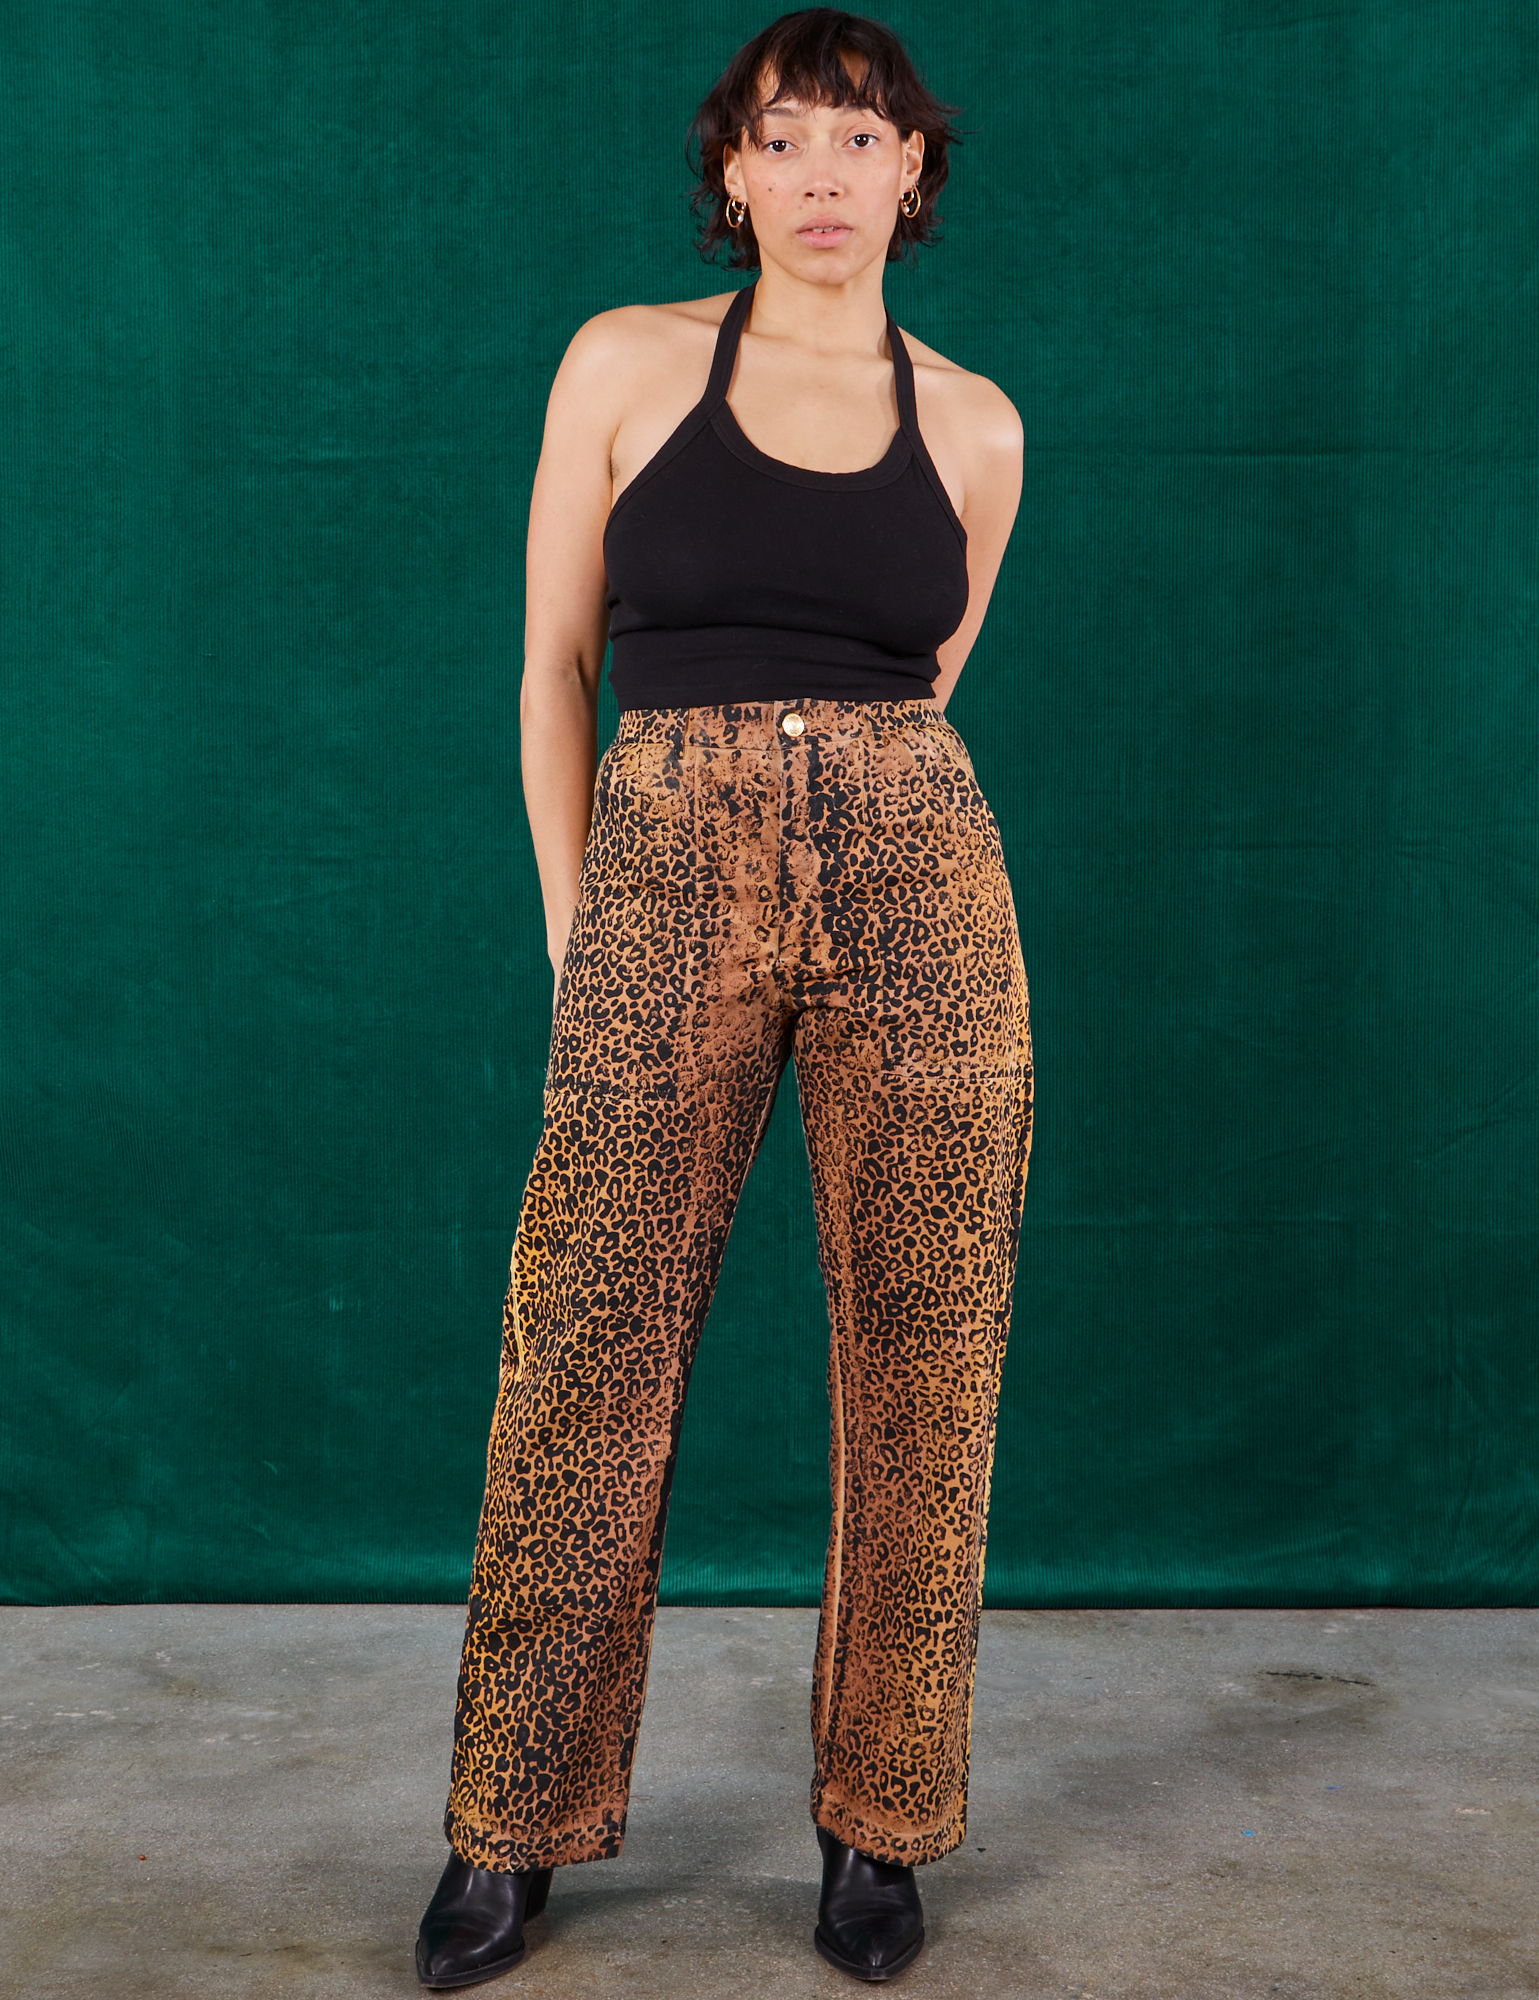 Tiara is 5&#39;4&quot; and wearing S Leopard Work Pants paired with black Halter Top